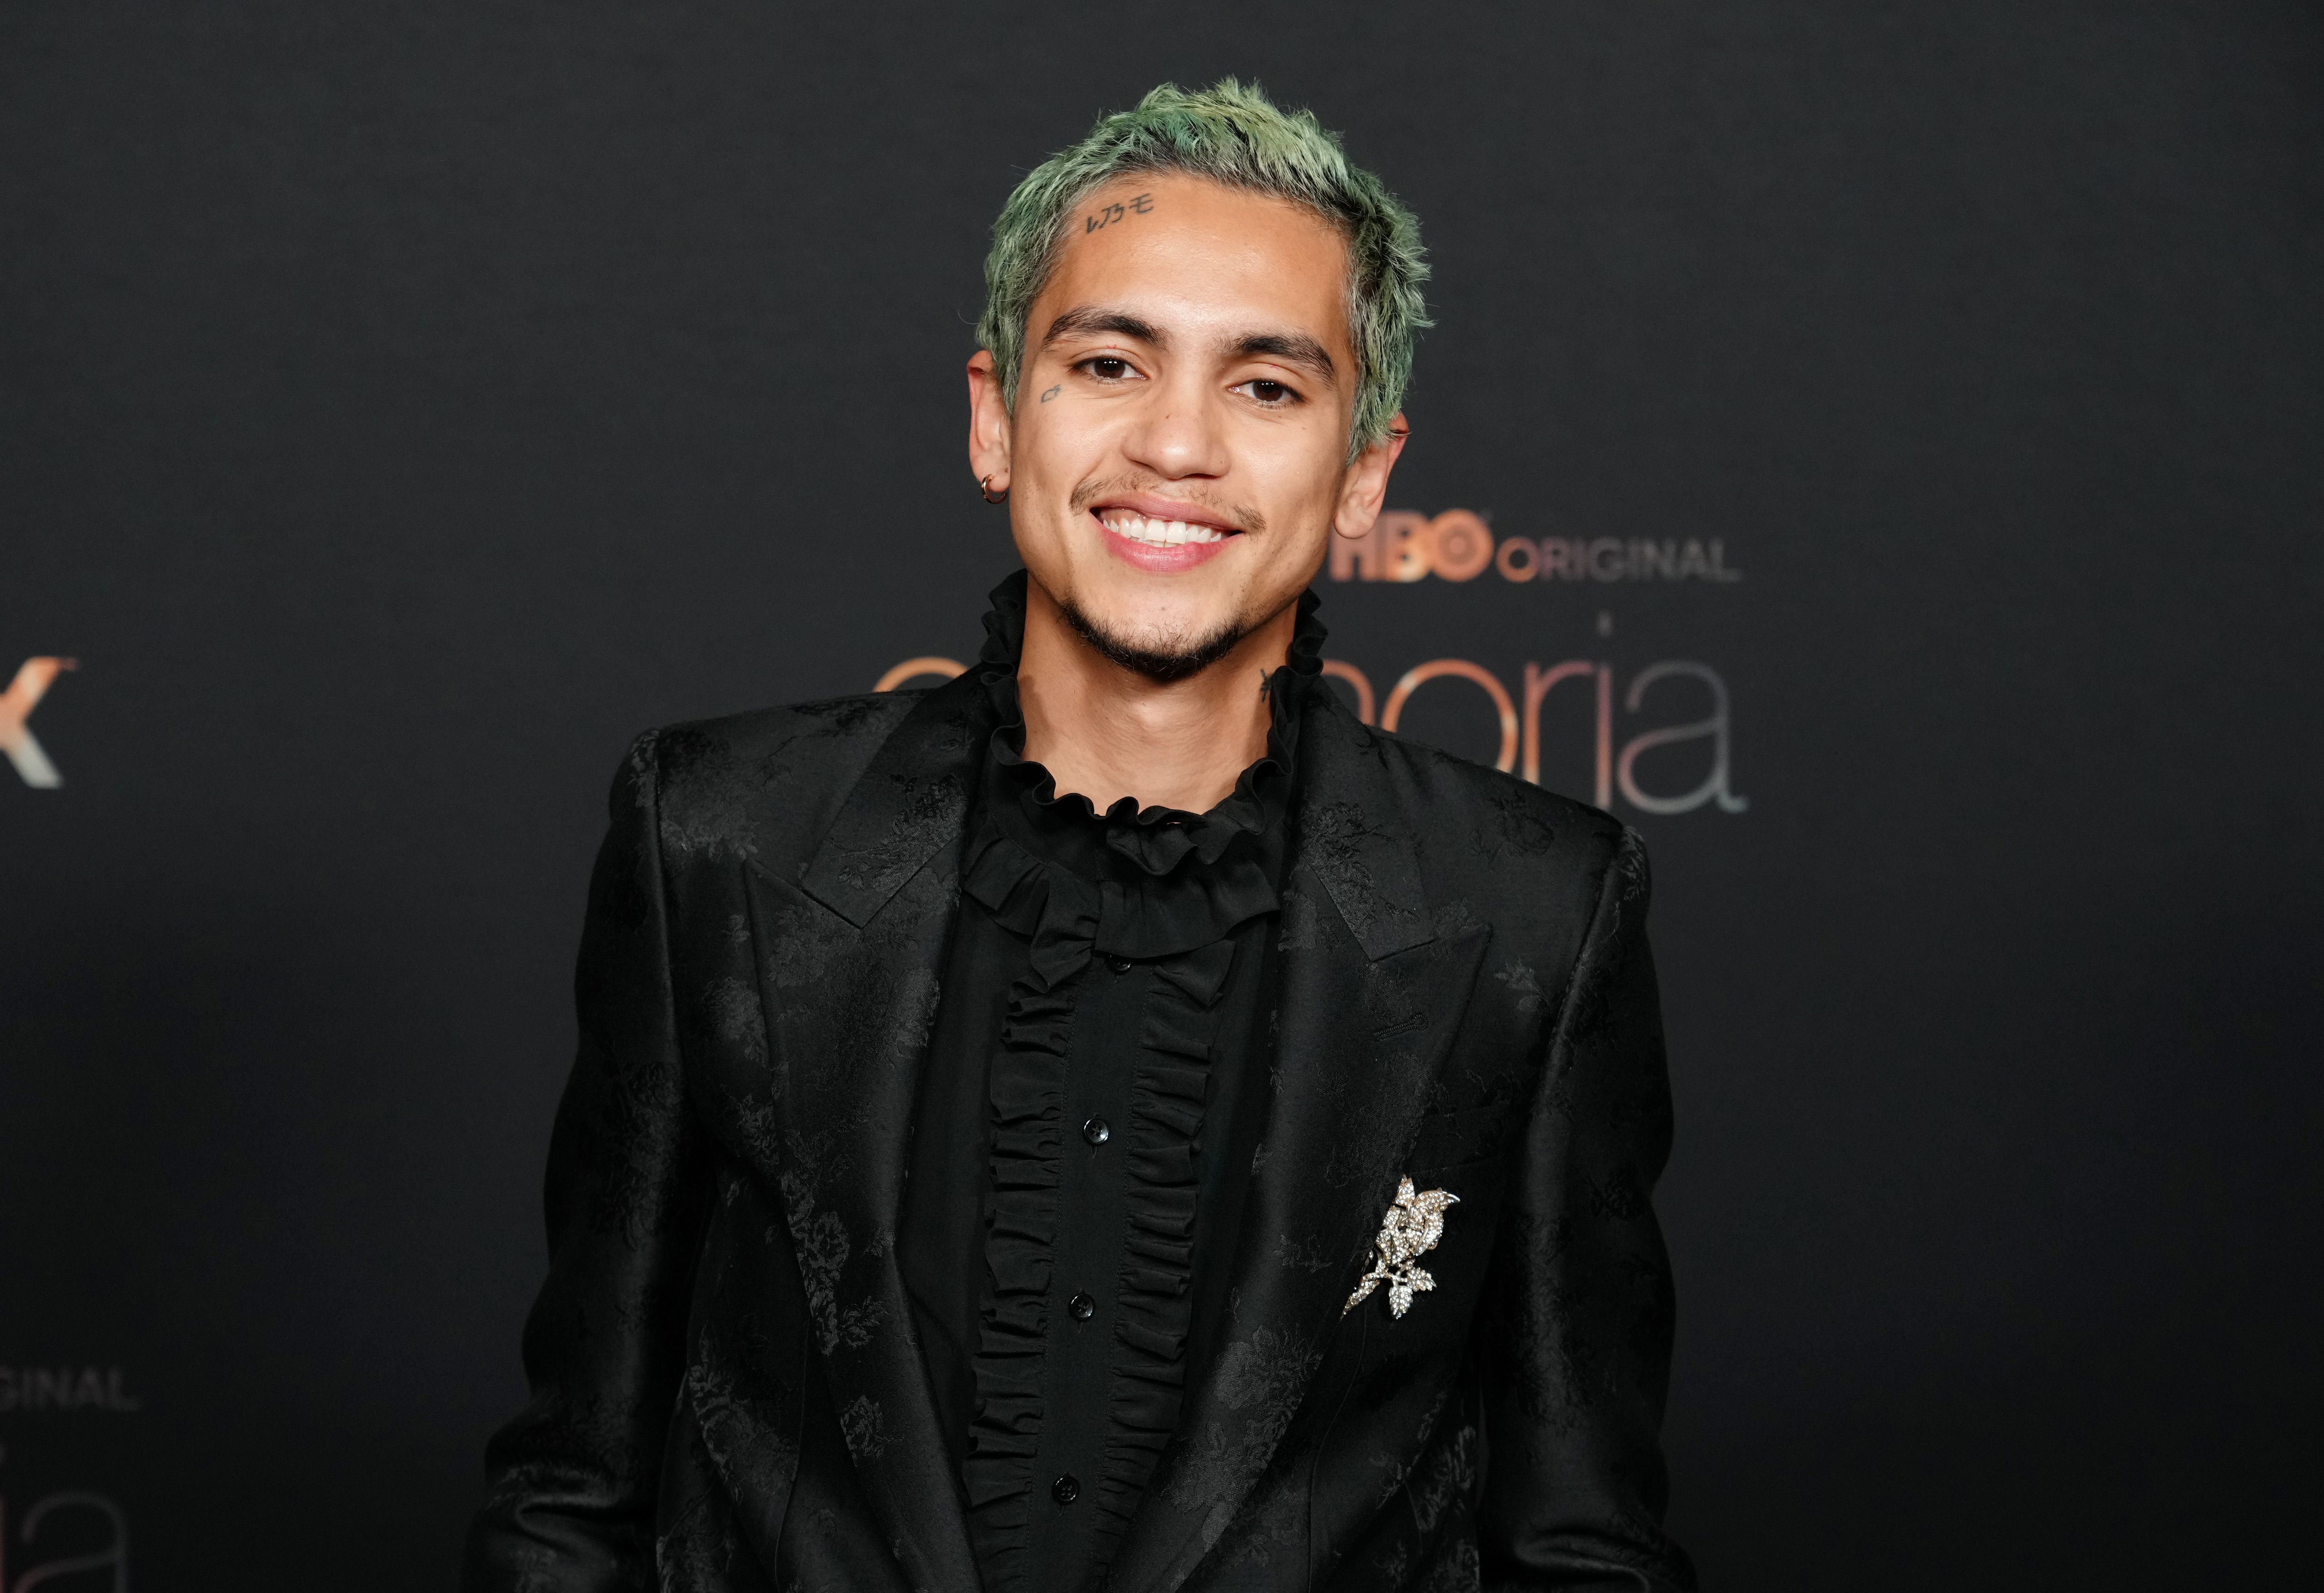 Elliot actor Dominic Fike attends HBO's Euphoria Season 2 Photo Call. Fike has green hair and wears a black suit jacket.